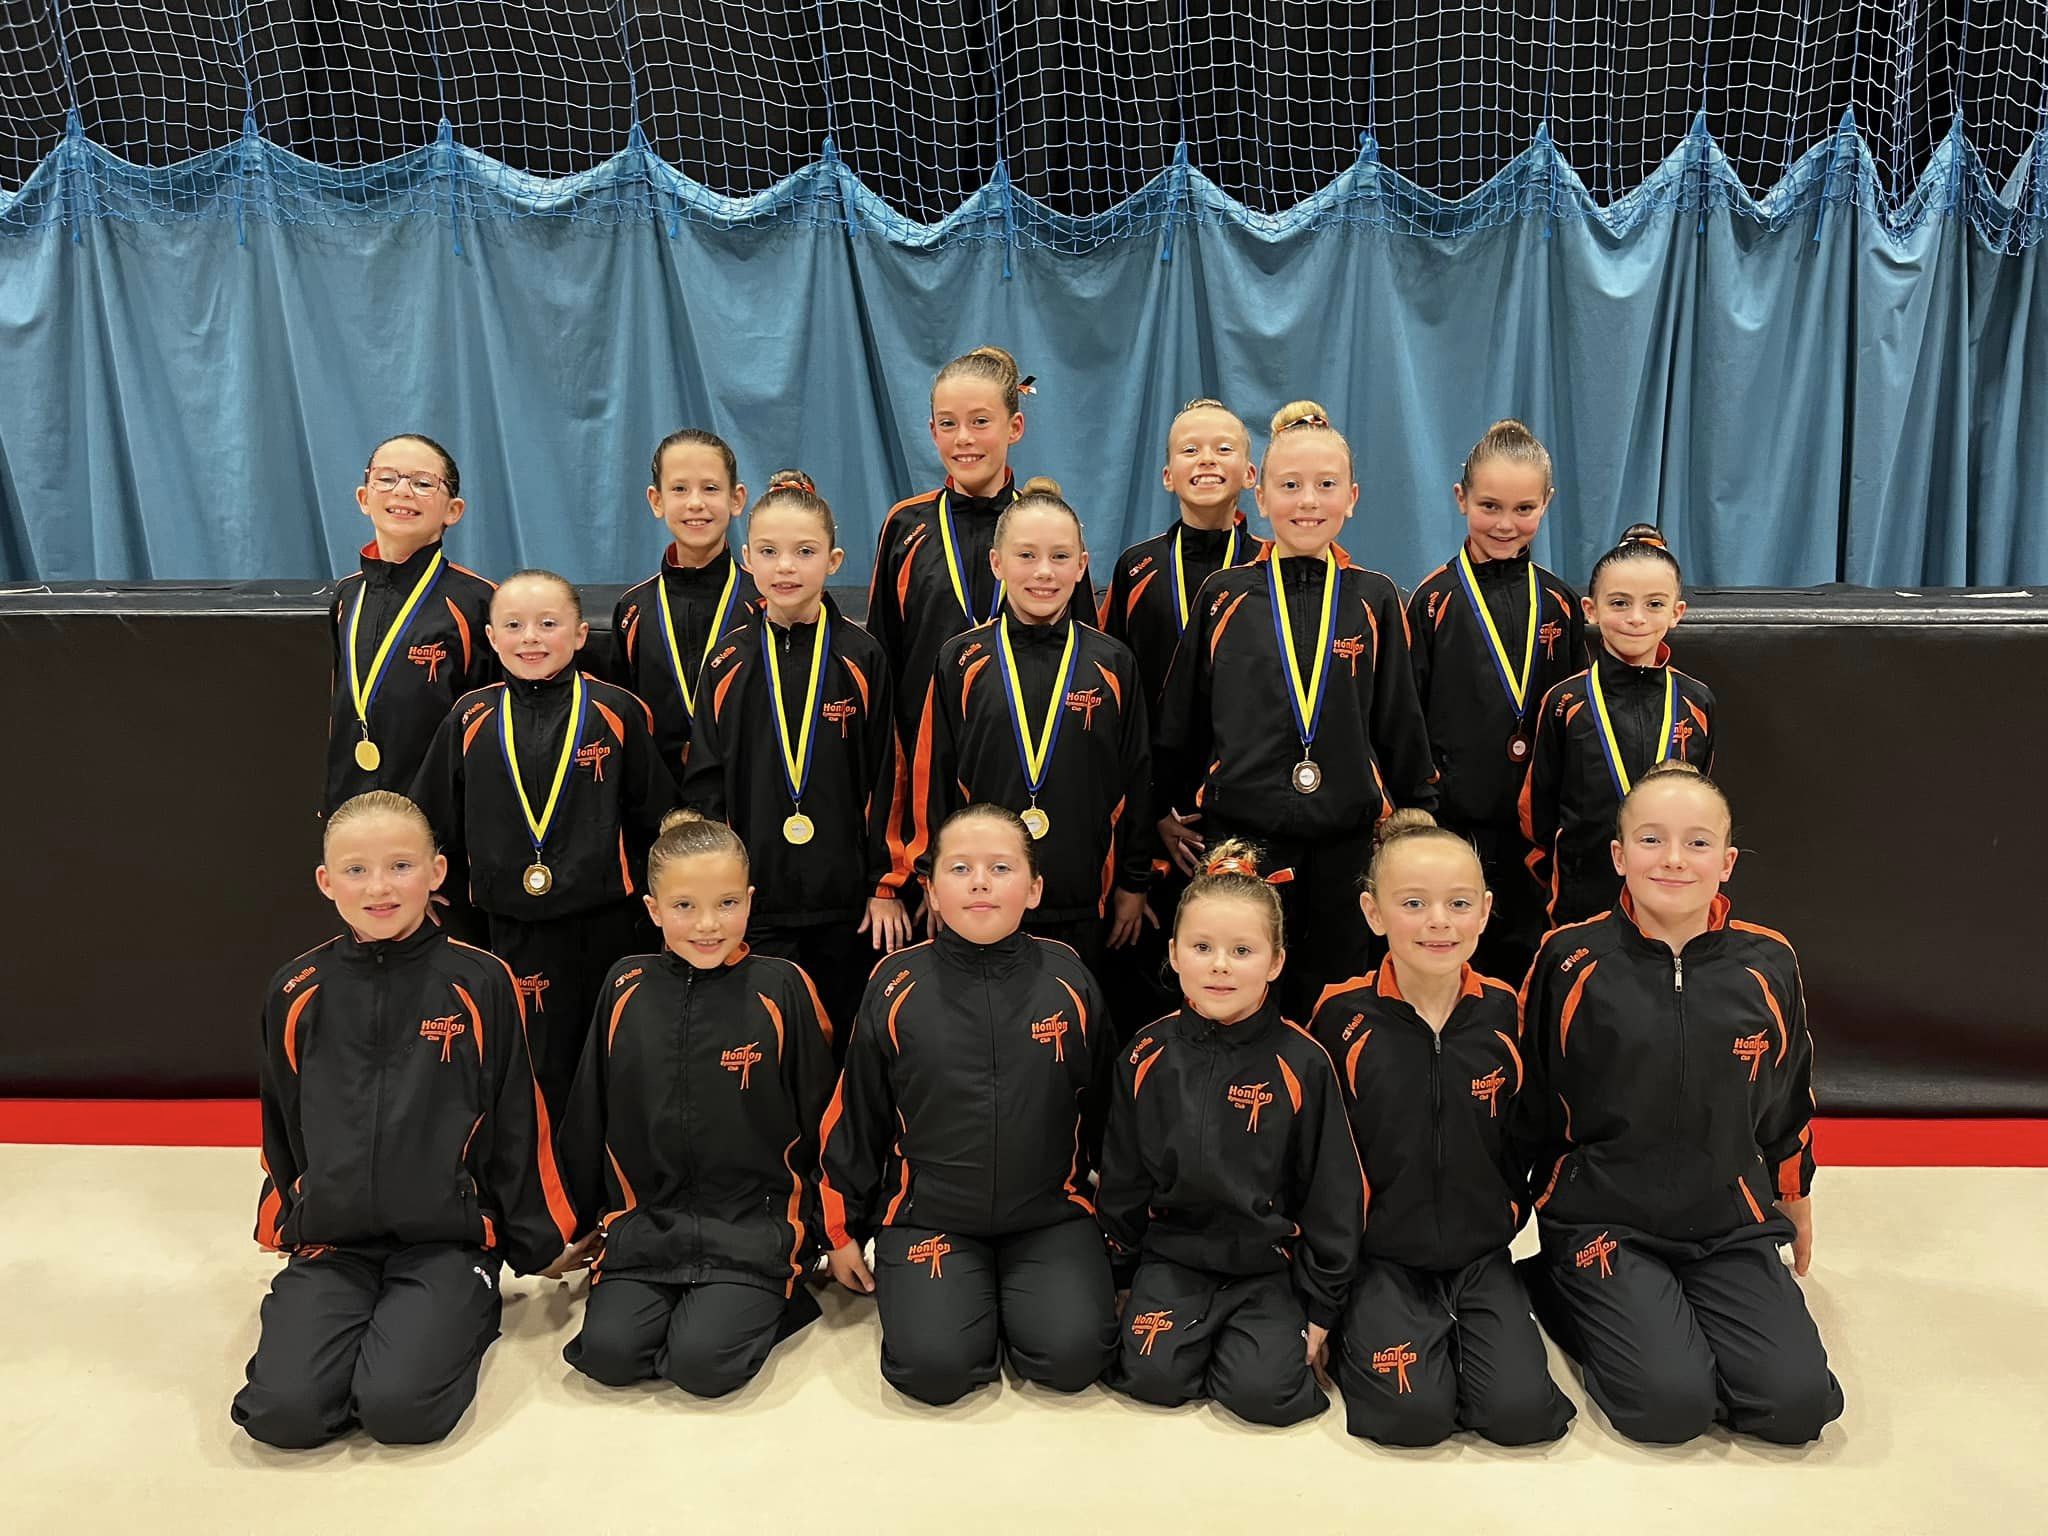 Honiton's Grade 1 & Grade 2 Competitors at the CDC Competition in Yate